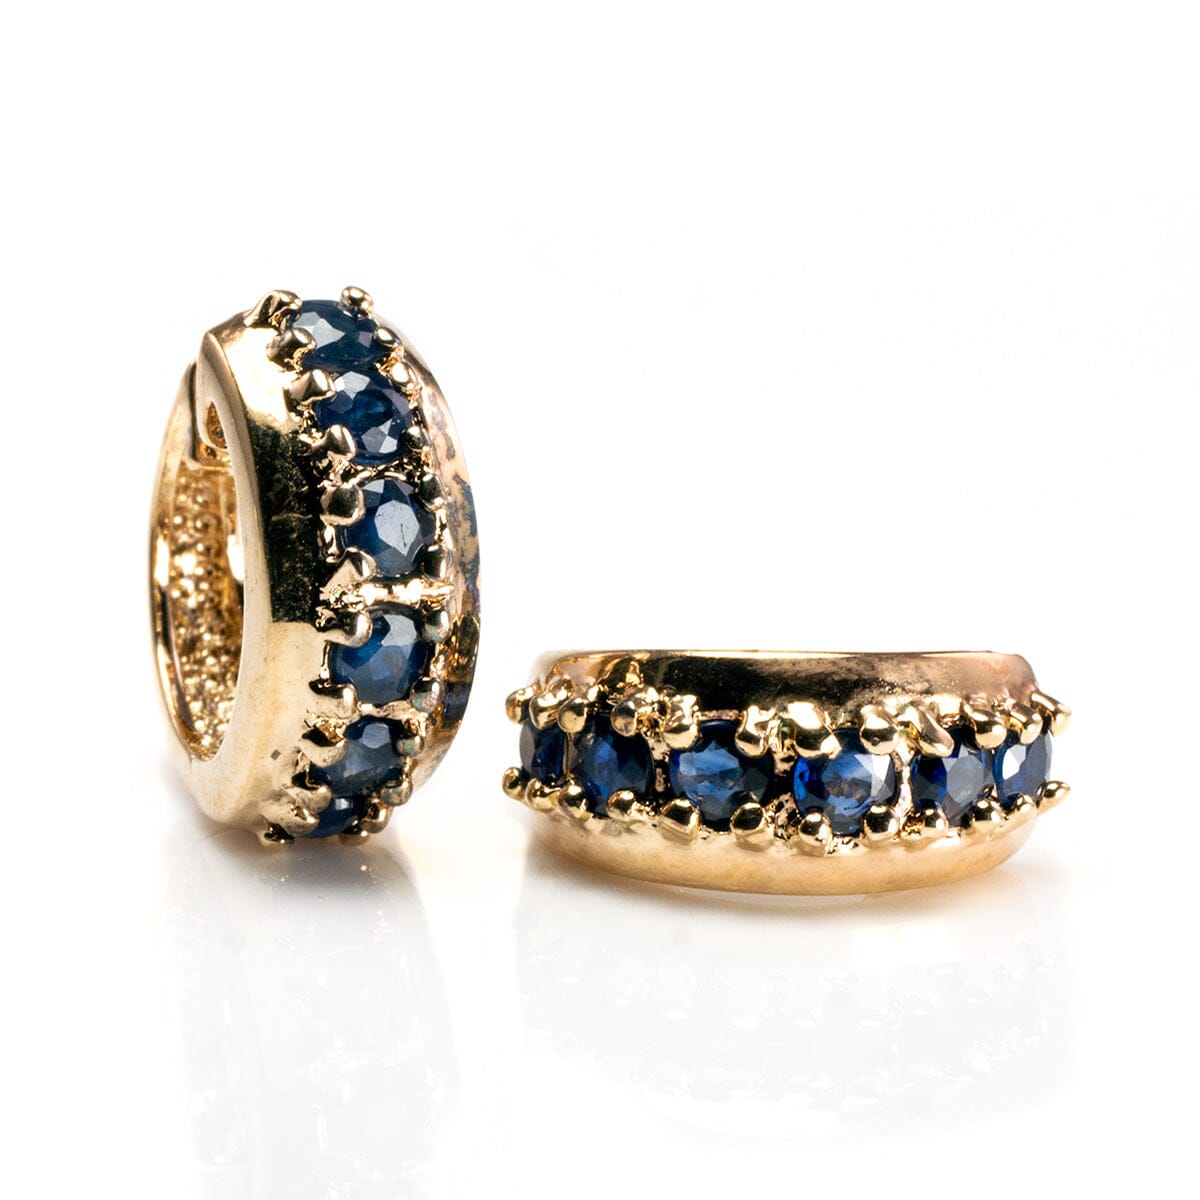 Great Lakes Boutique Gold Plated Blue Stone Earrings